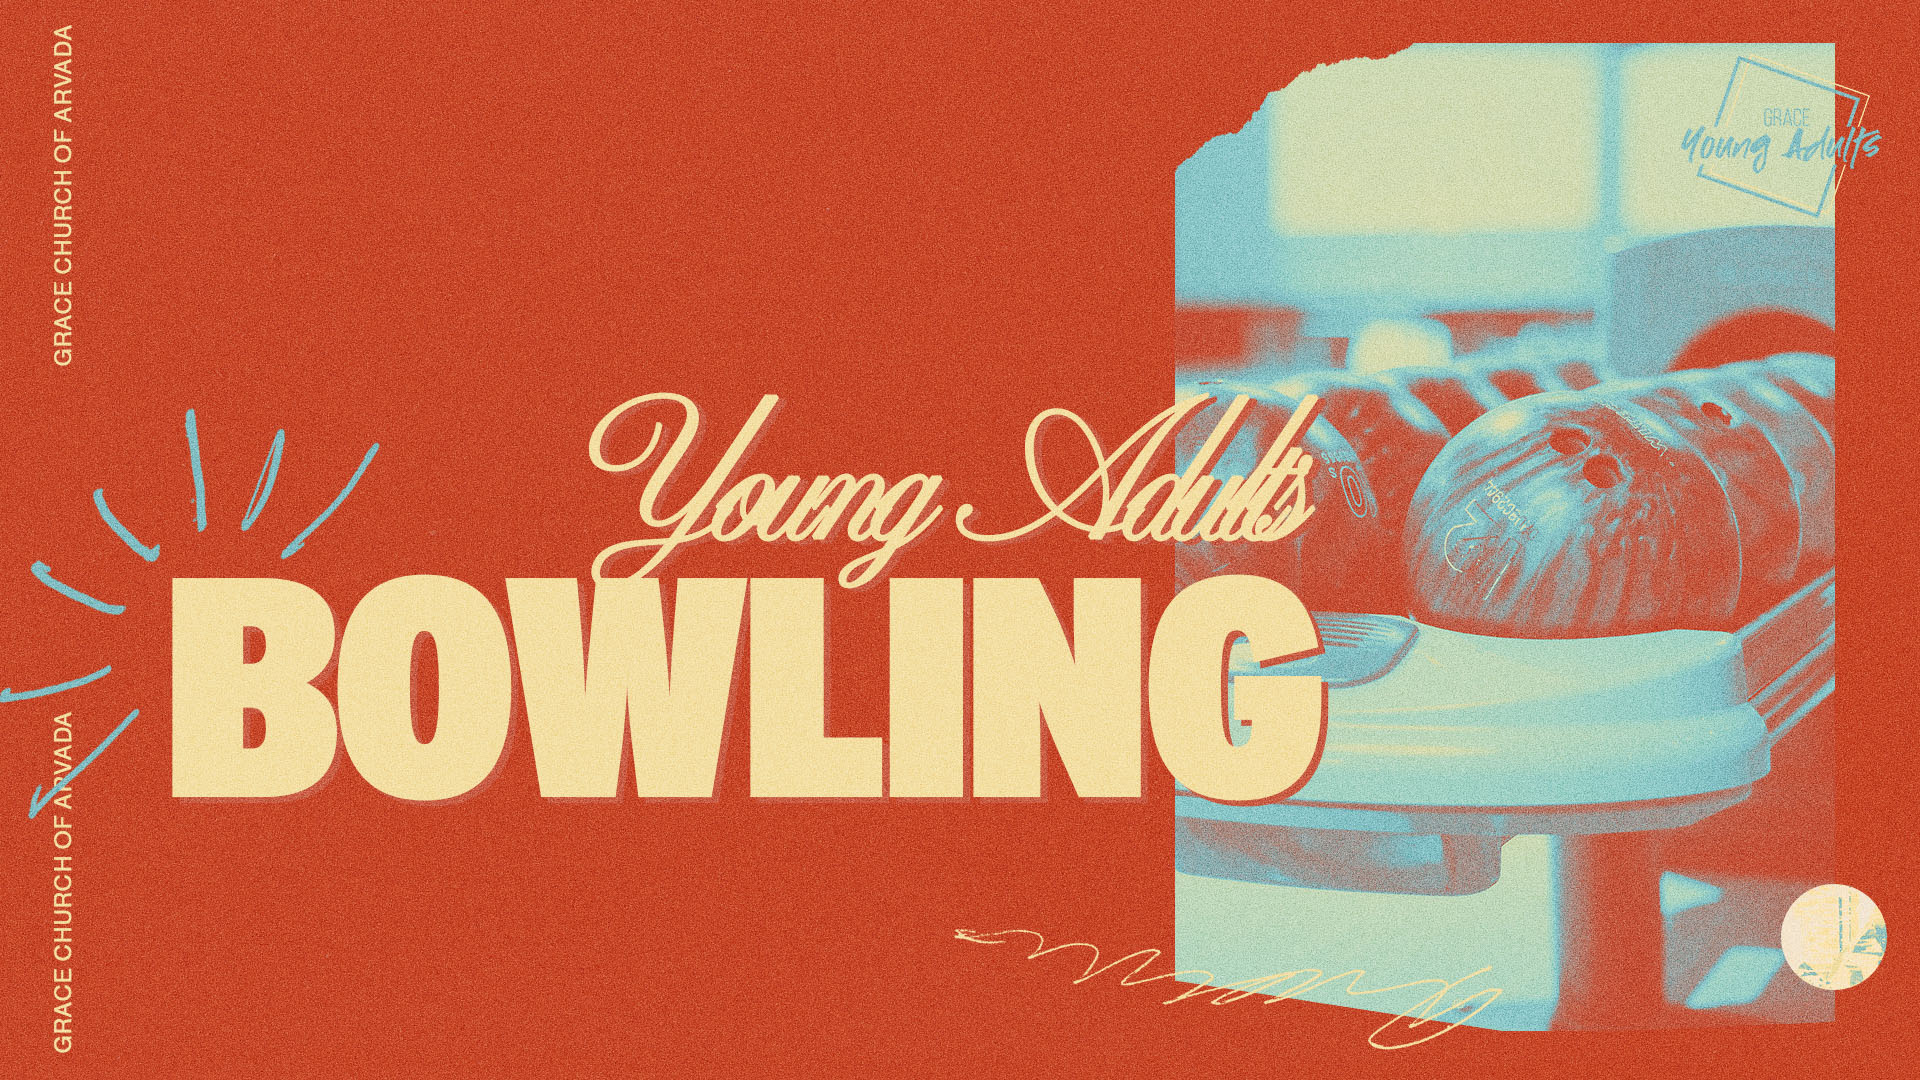 Young Adults Bowling

Friday | 6:30pm-8:30pm
May 10
